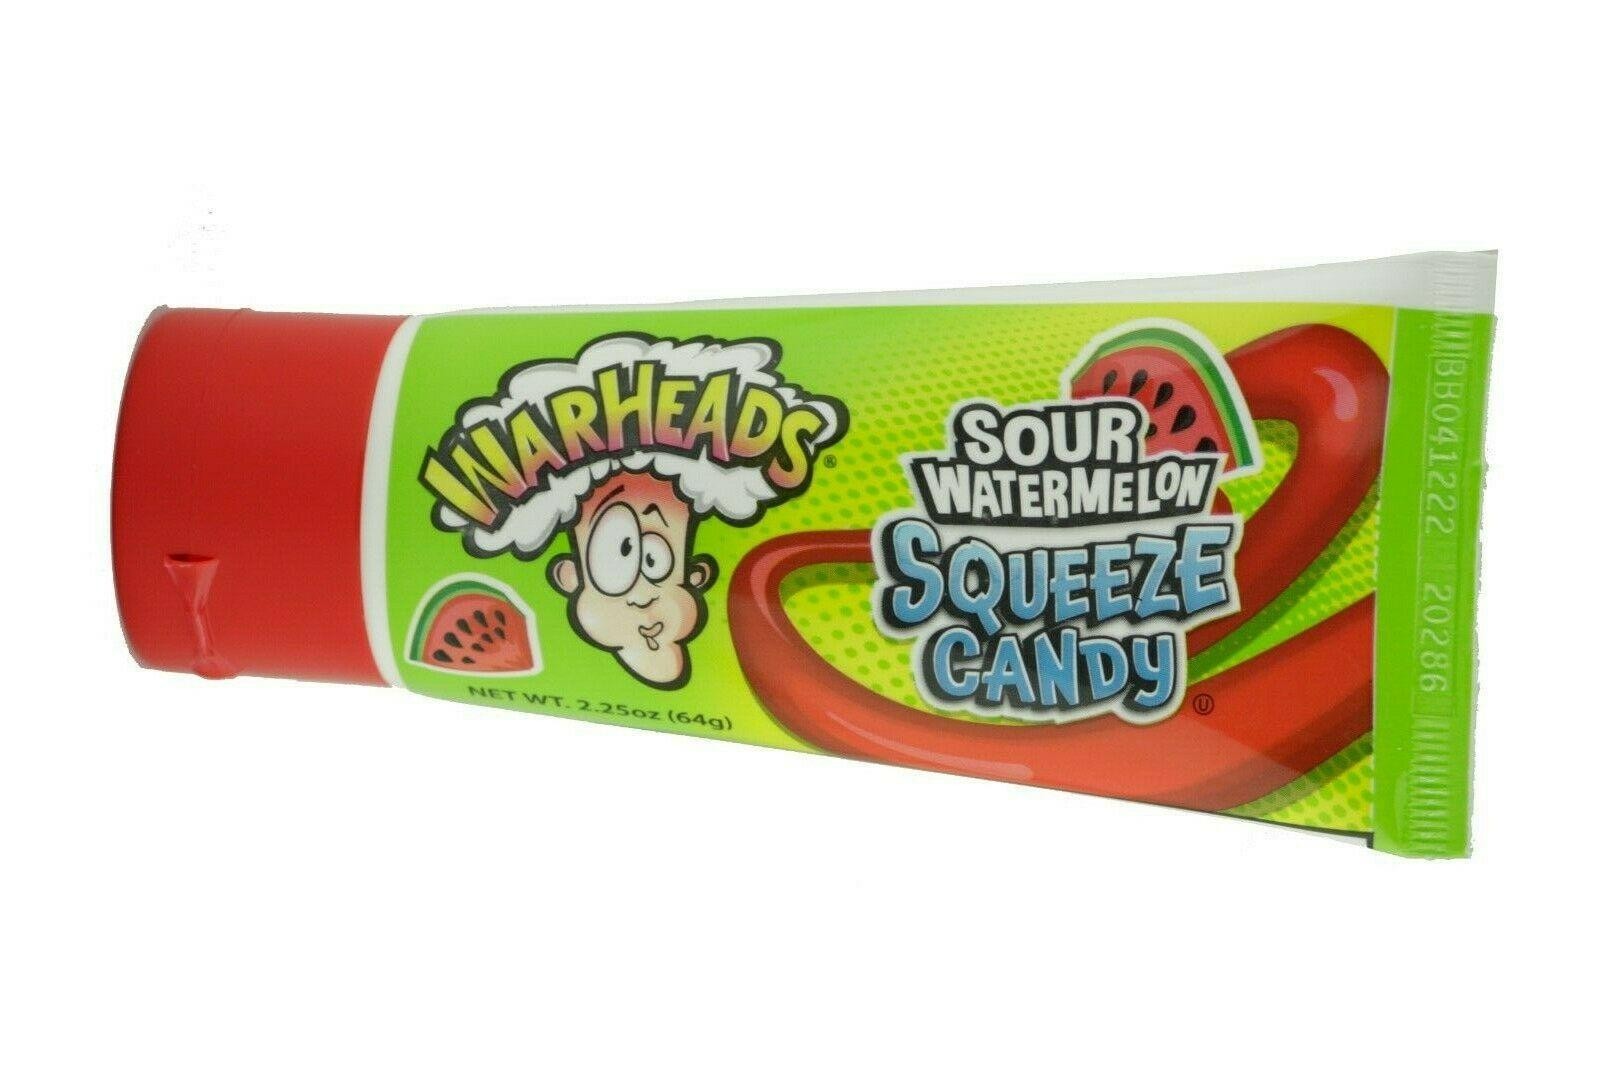 WarHeads Sour Watermelon Squeeze Candy  2.25 Oz.